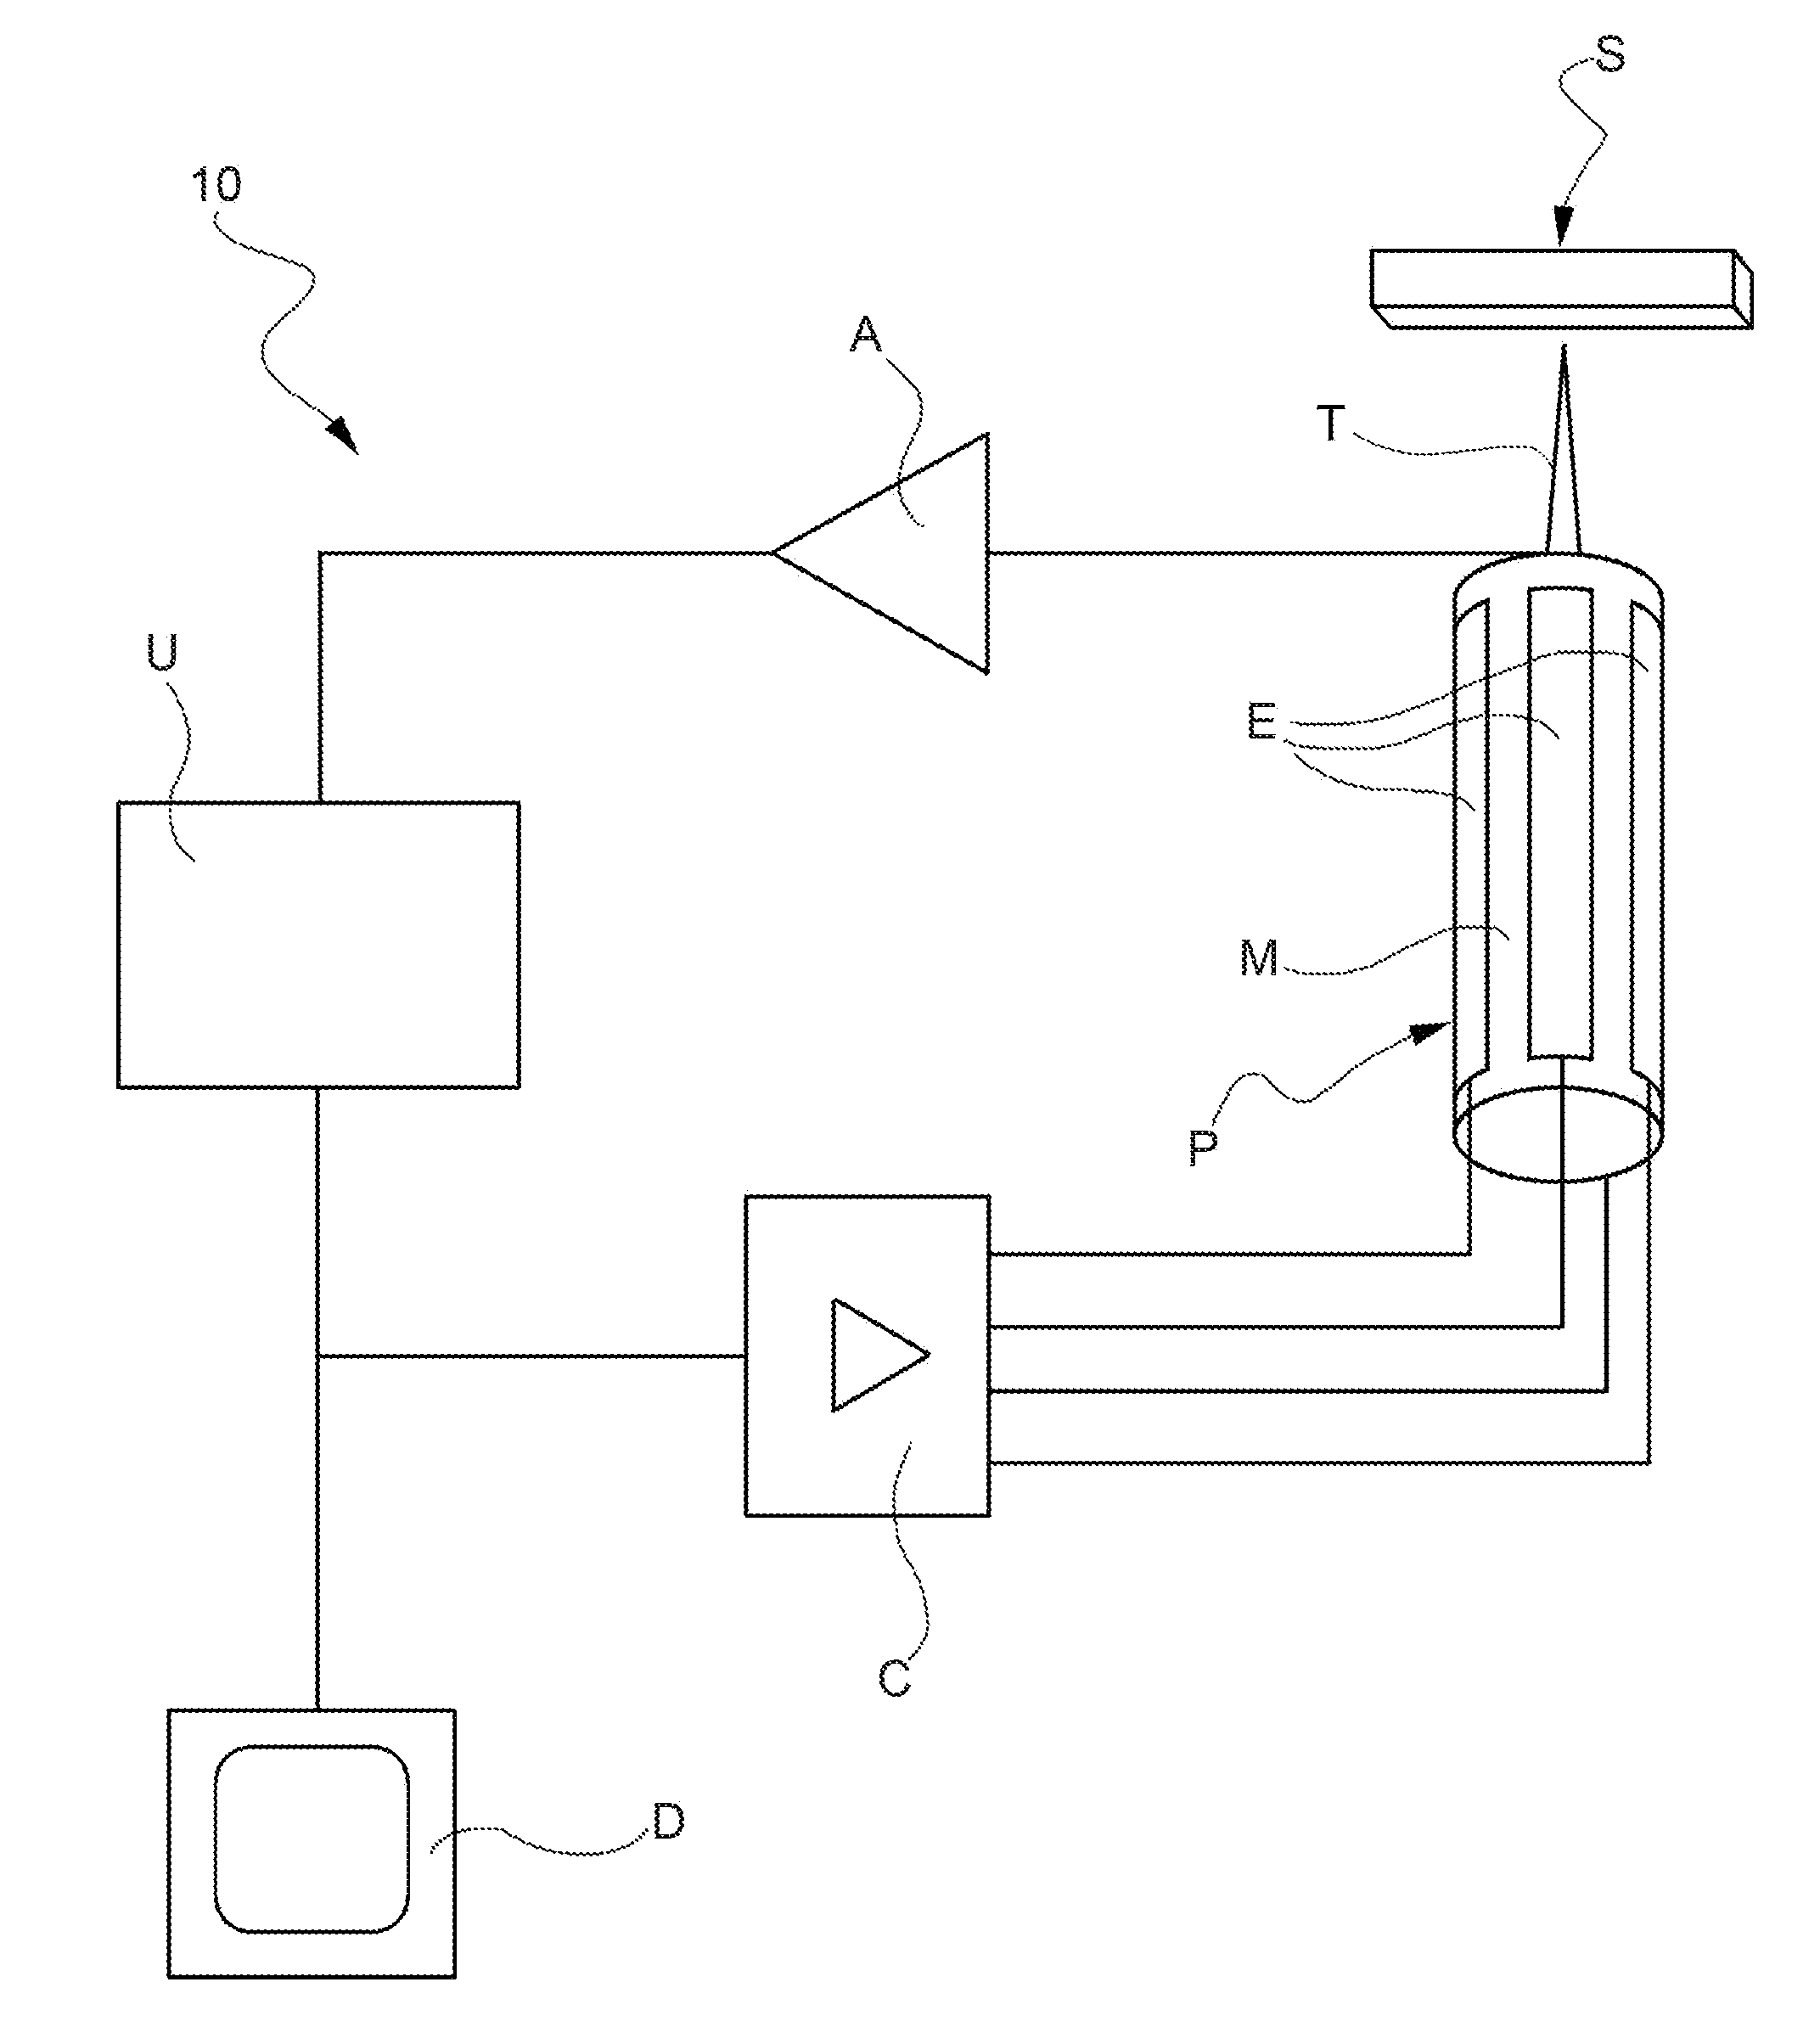 Method for driving a scanning probe microscope at elevated scan frequencies